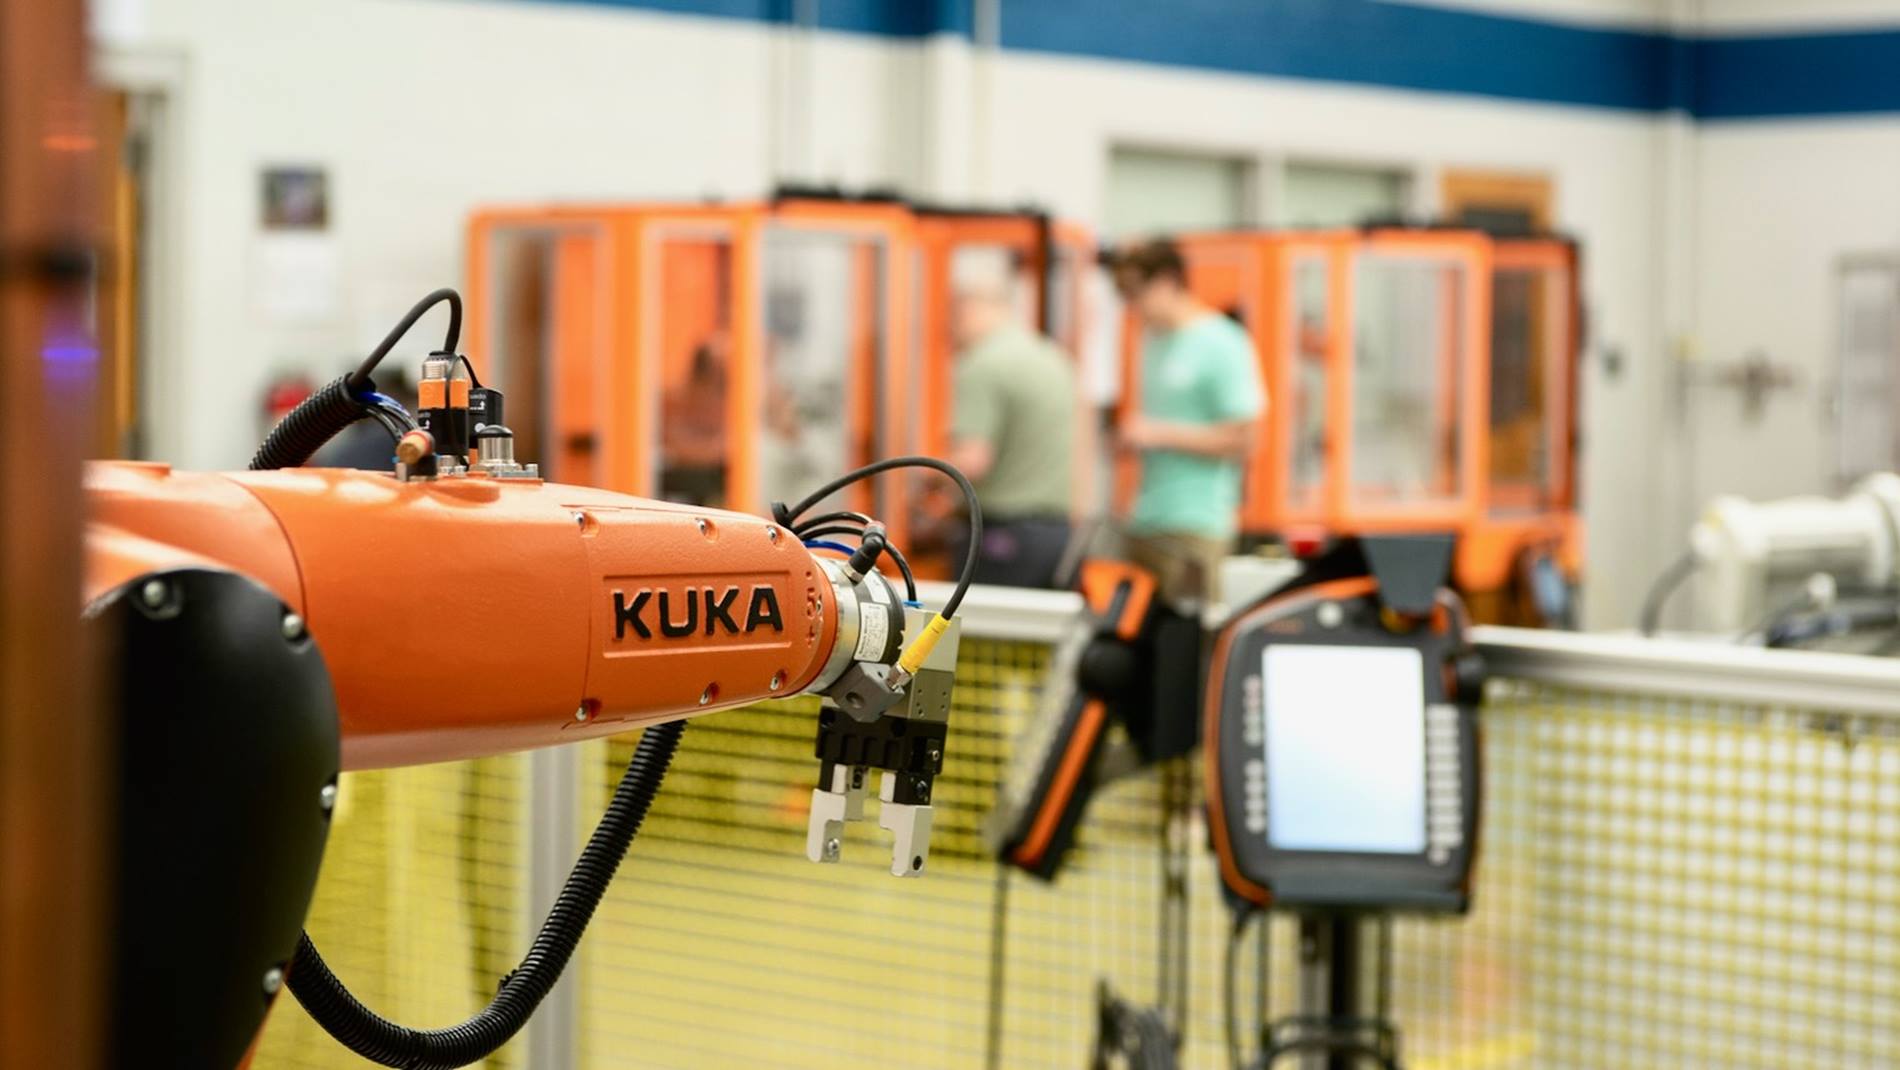 KR AGILUS is a small payload industrial robot